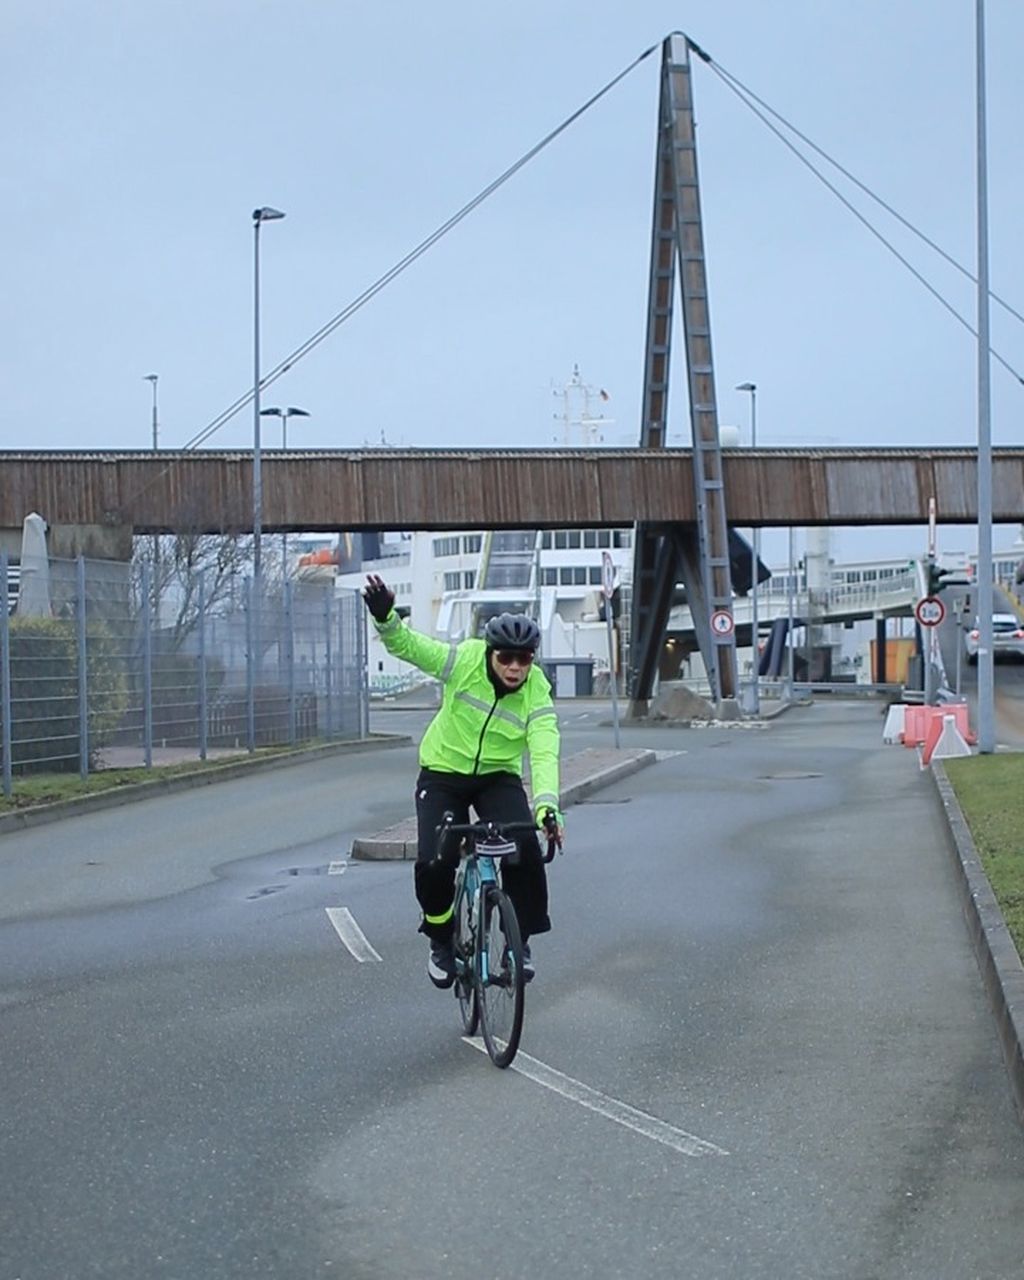 On January 24, 2024, Royke Lumowa cycled from Rodby (Denmark) to Hamburg (Germany). Royke arrived at the Puttgarden Dock (Germany) after crossing from Rodby (Denmark) using a ferry for 45 minutes.